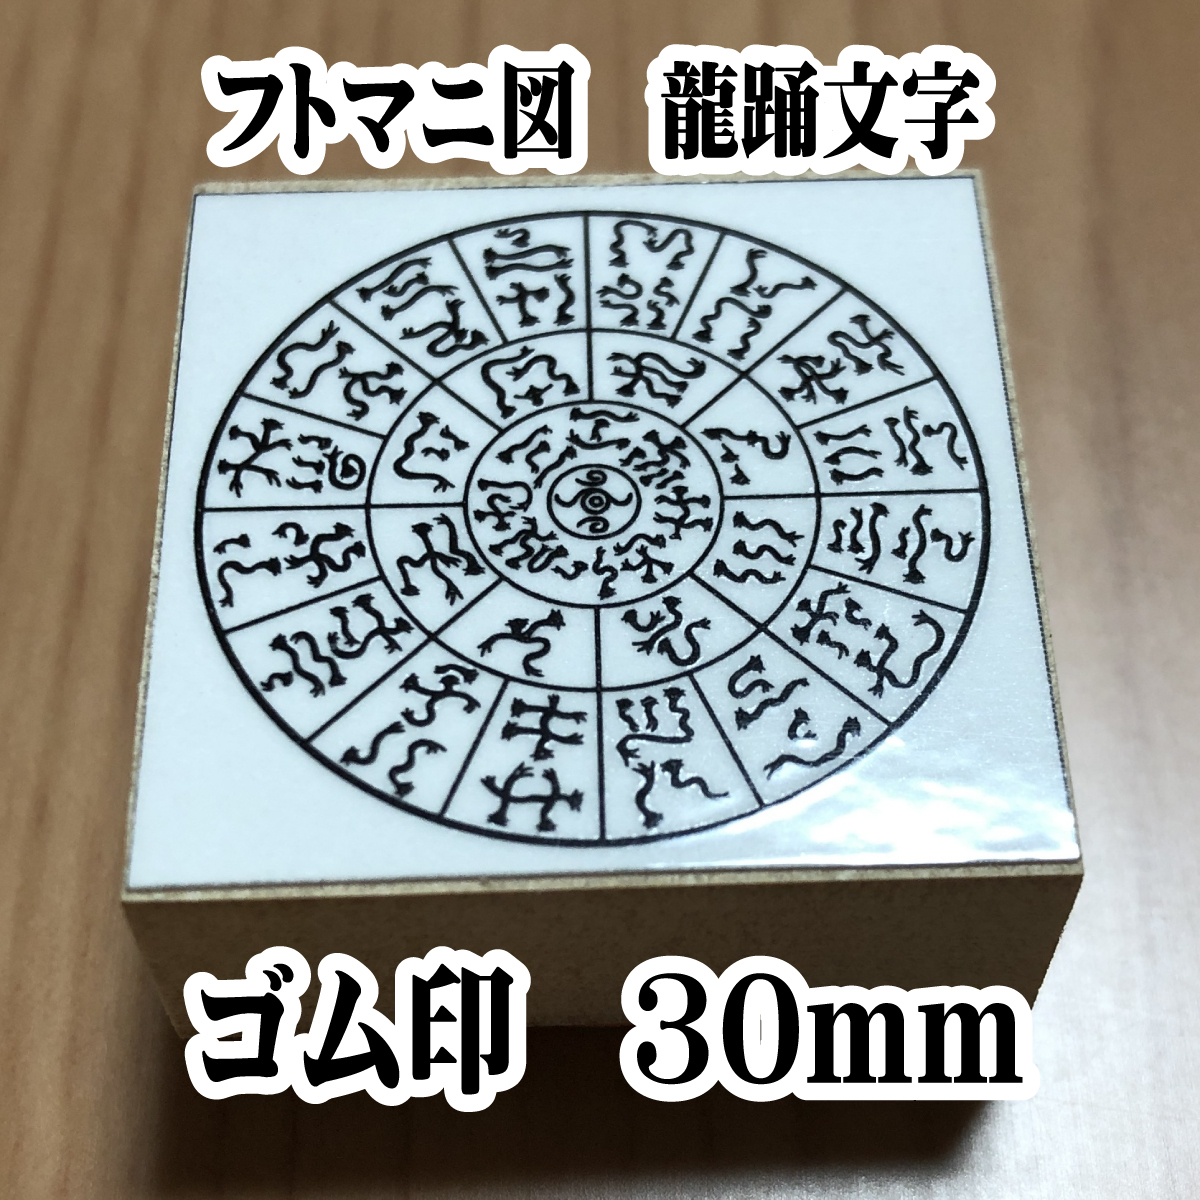 *ftomani map dragon . character is .. better fortune stamp rubber seal 30mm